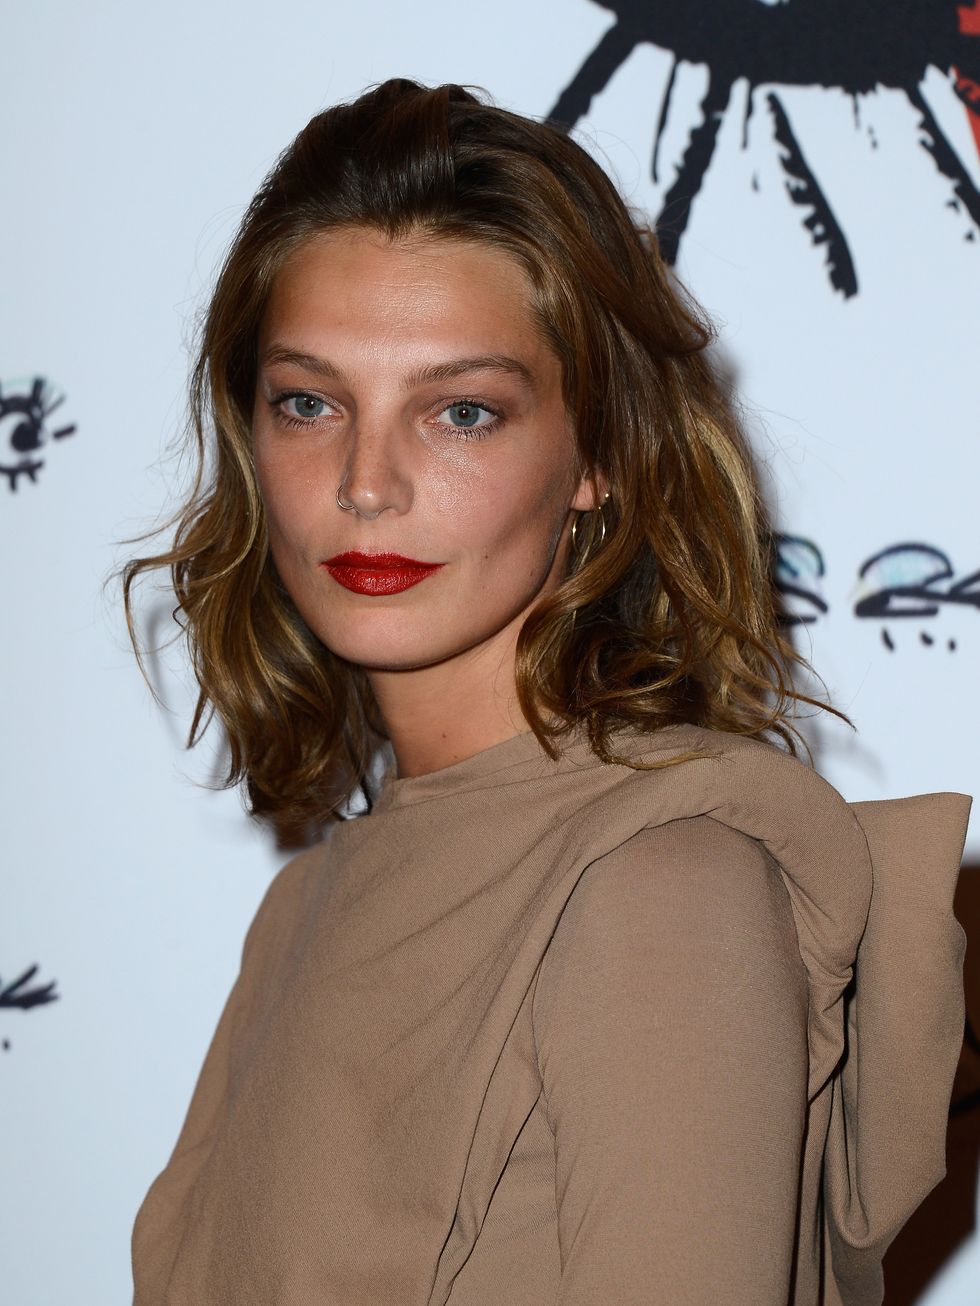 <p><strong>Daria Werbowy</strong></p>

<p>"Where do I start? Always my model of choice, she is effortless and beautiful. And she gets more amazing looking the older she gets."</p>

<p>Michelle Duguid - Senior Fashion Editor</p>